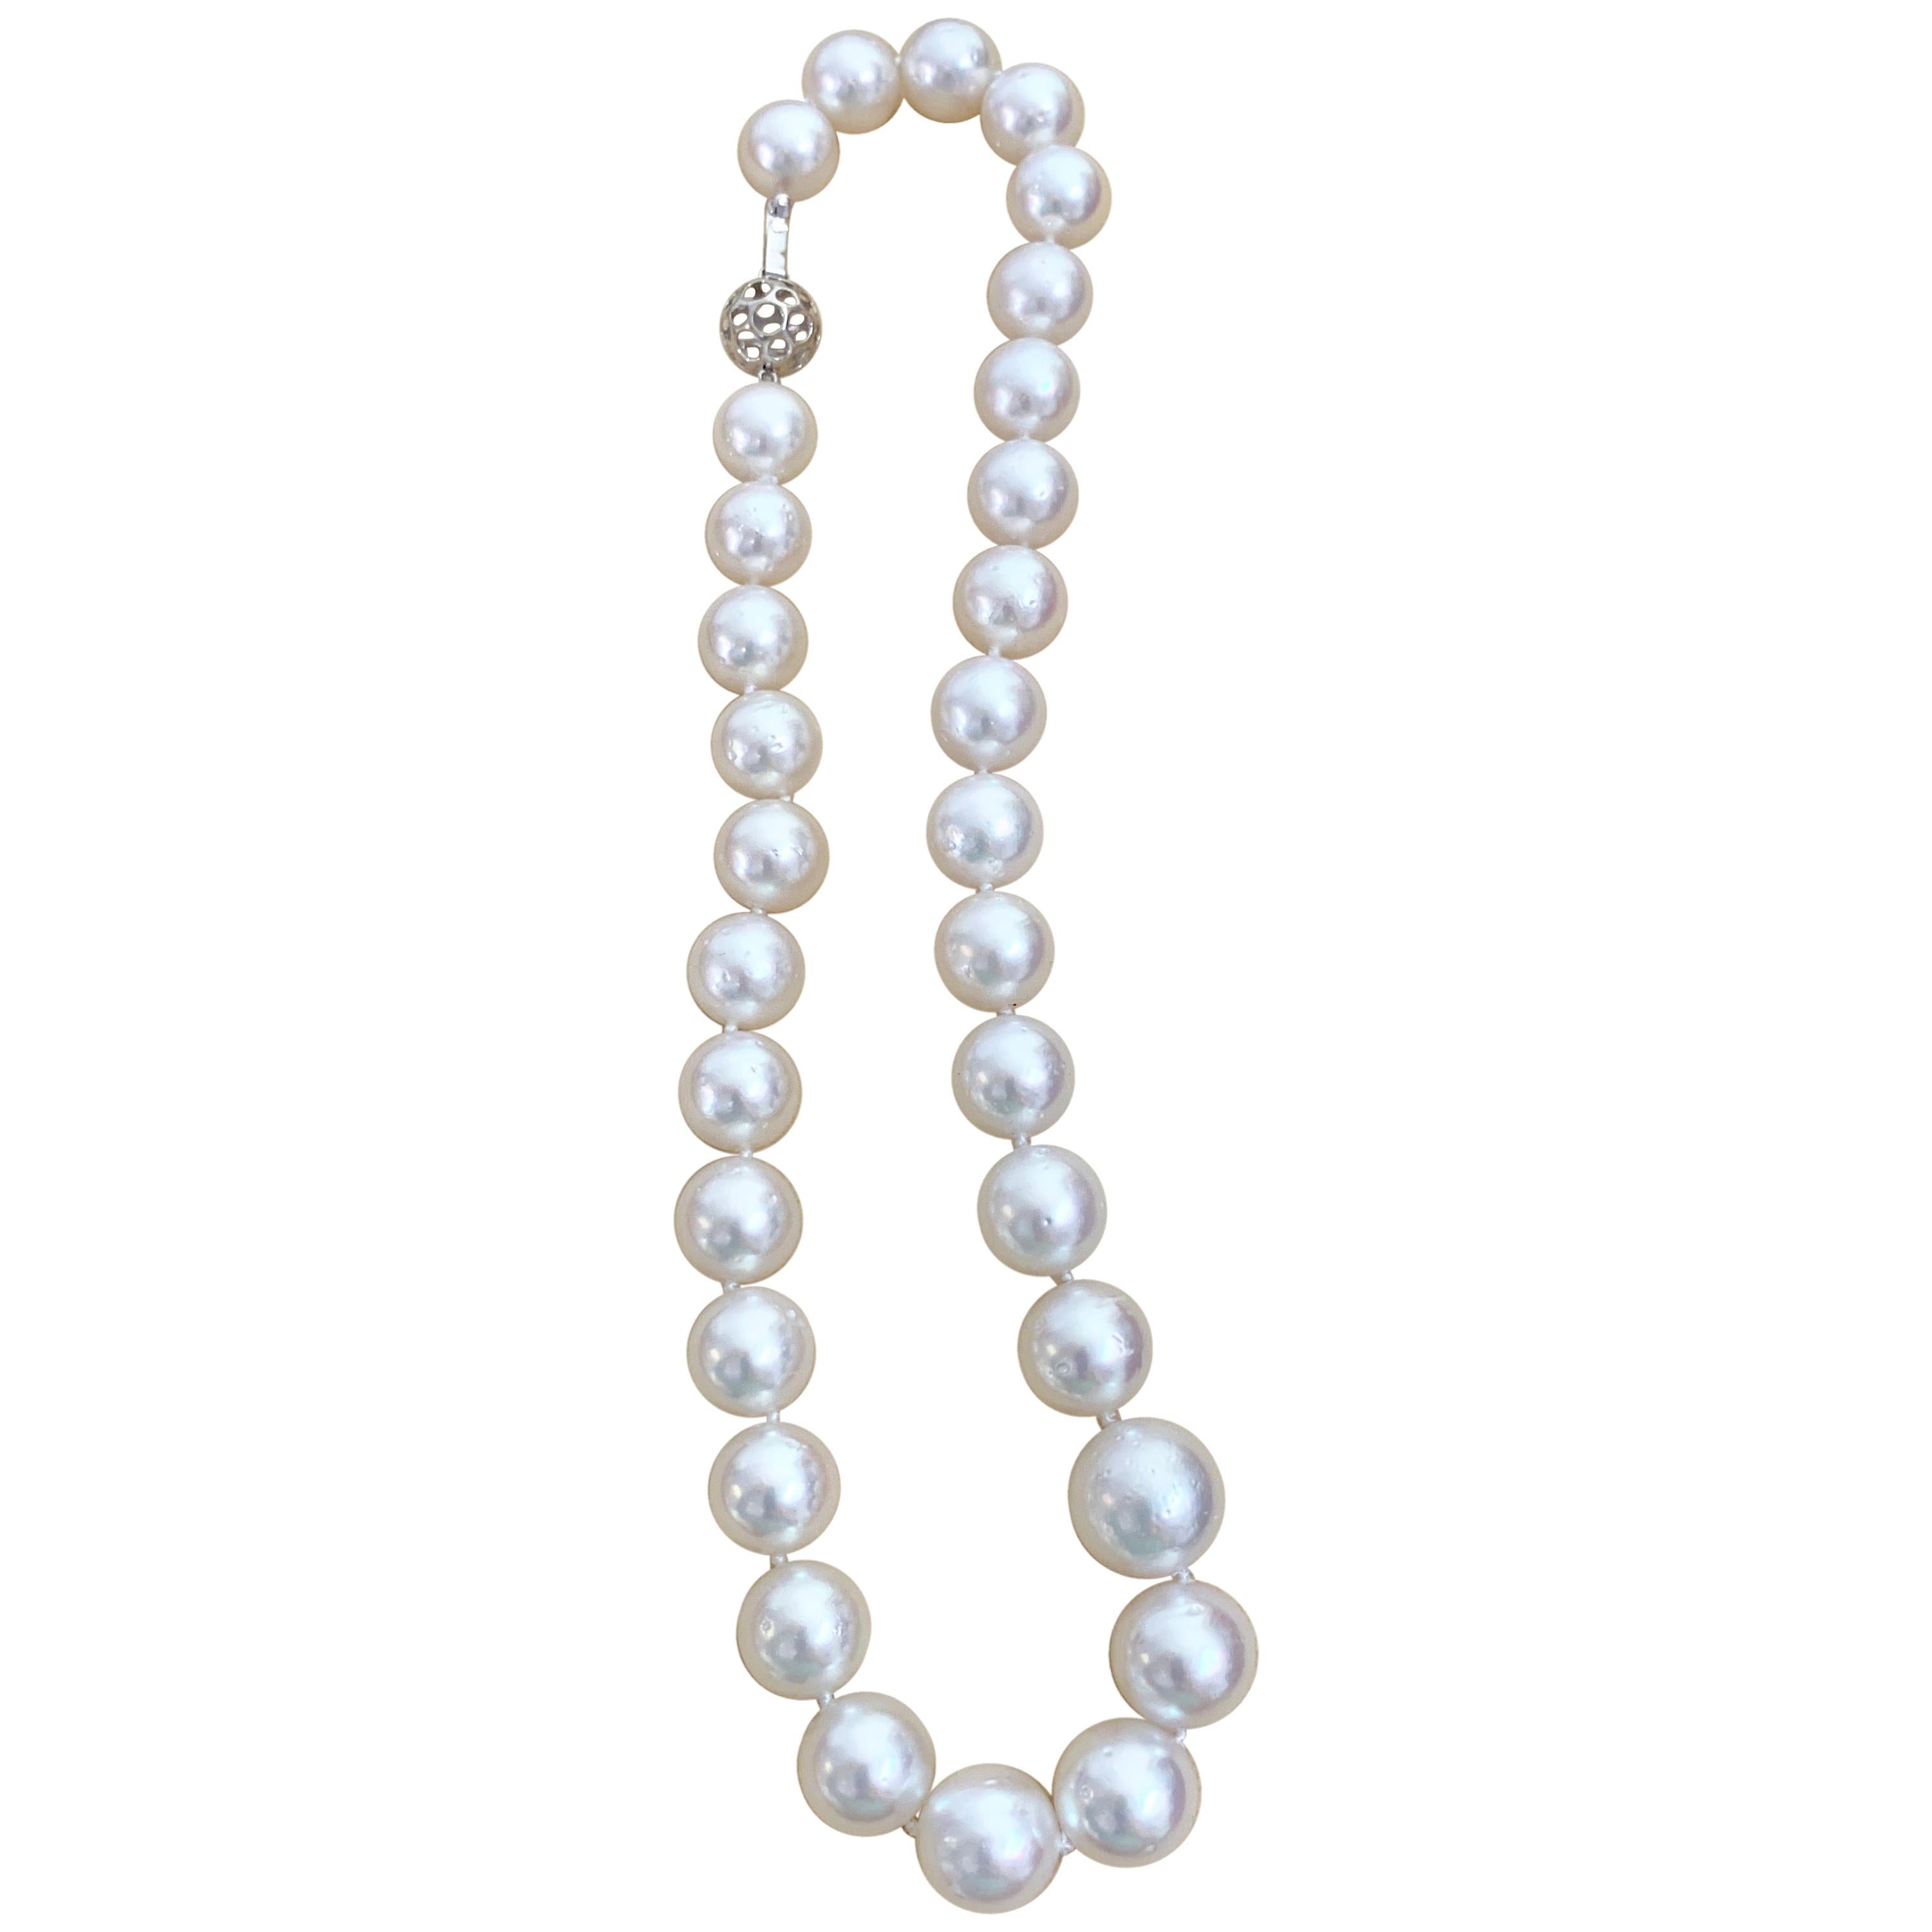 White South Sea Pearls Long Strand Necklace 14 Karat Gold Clasp